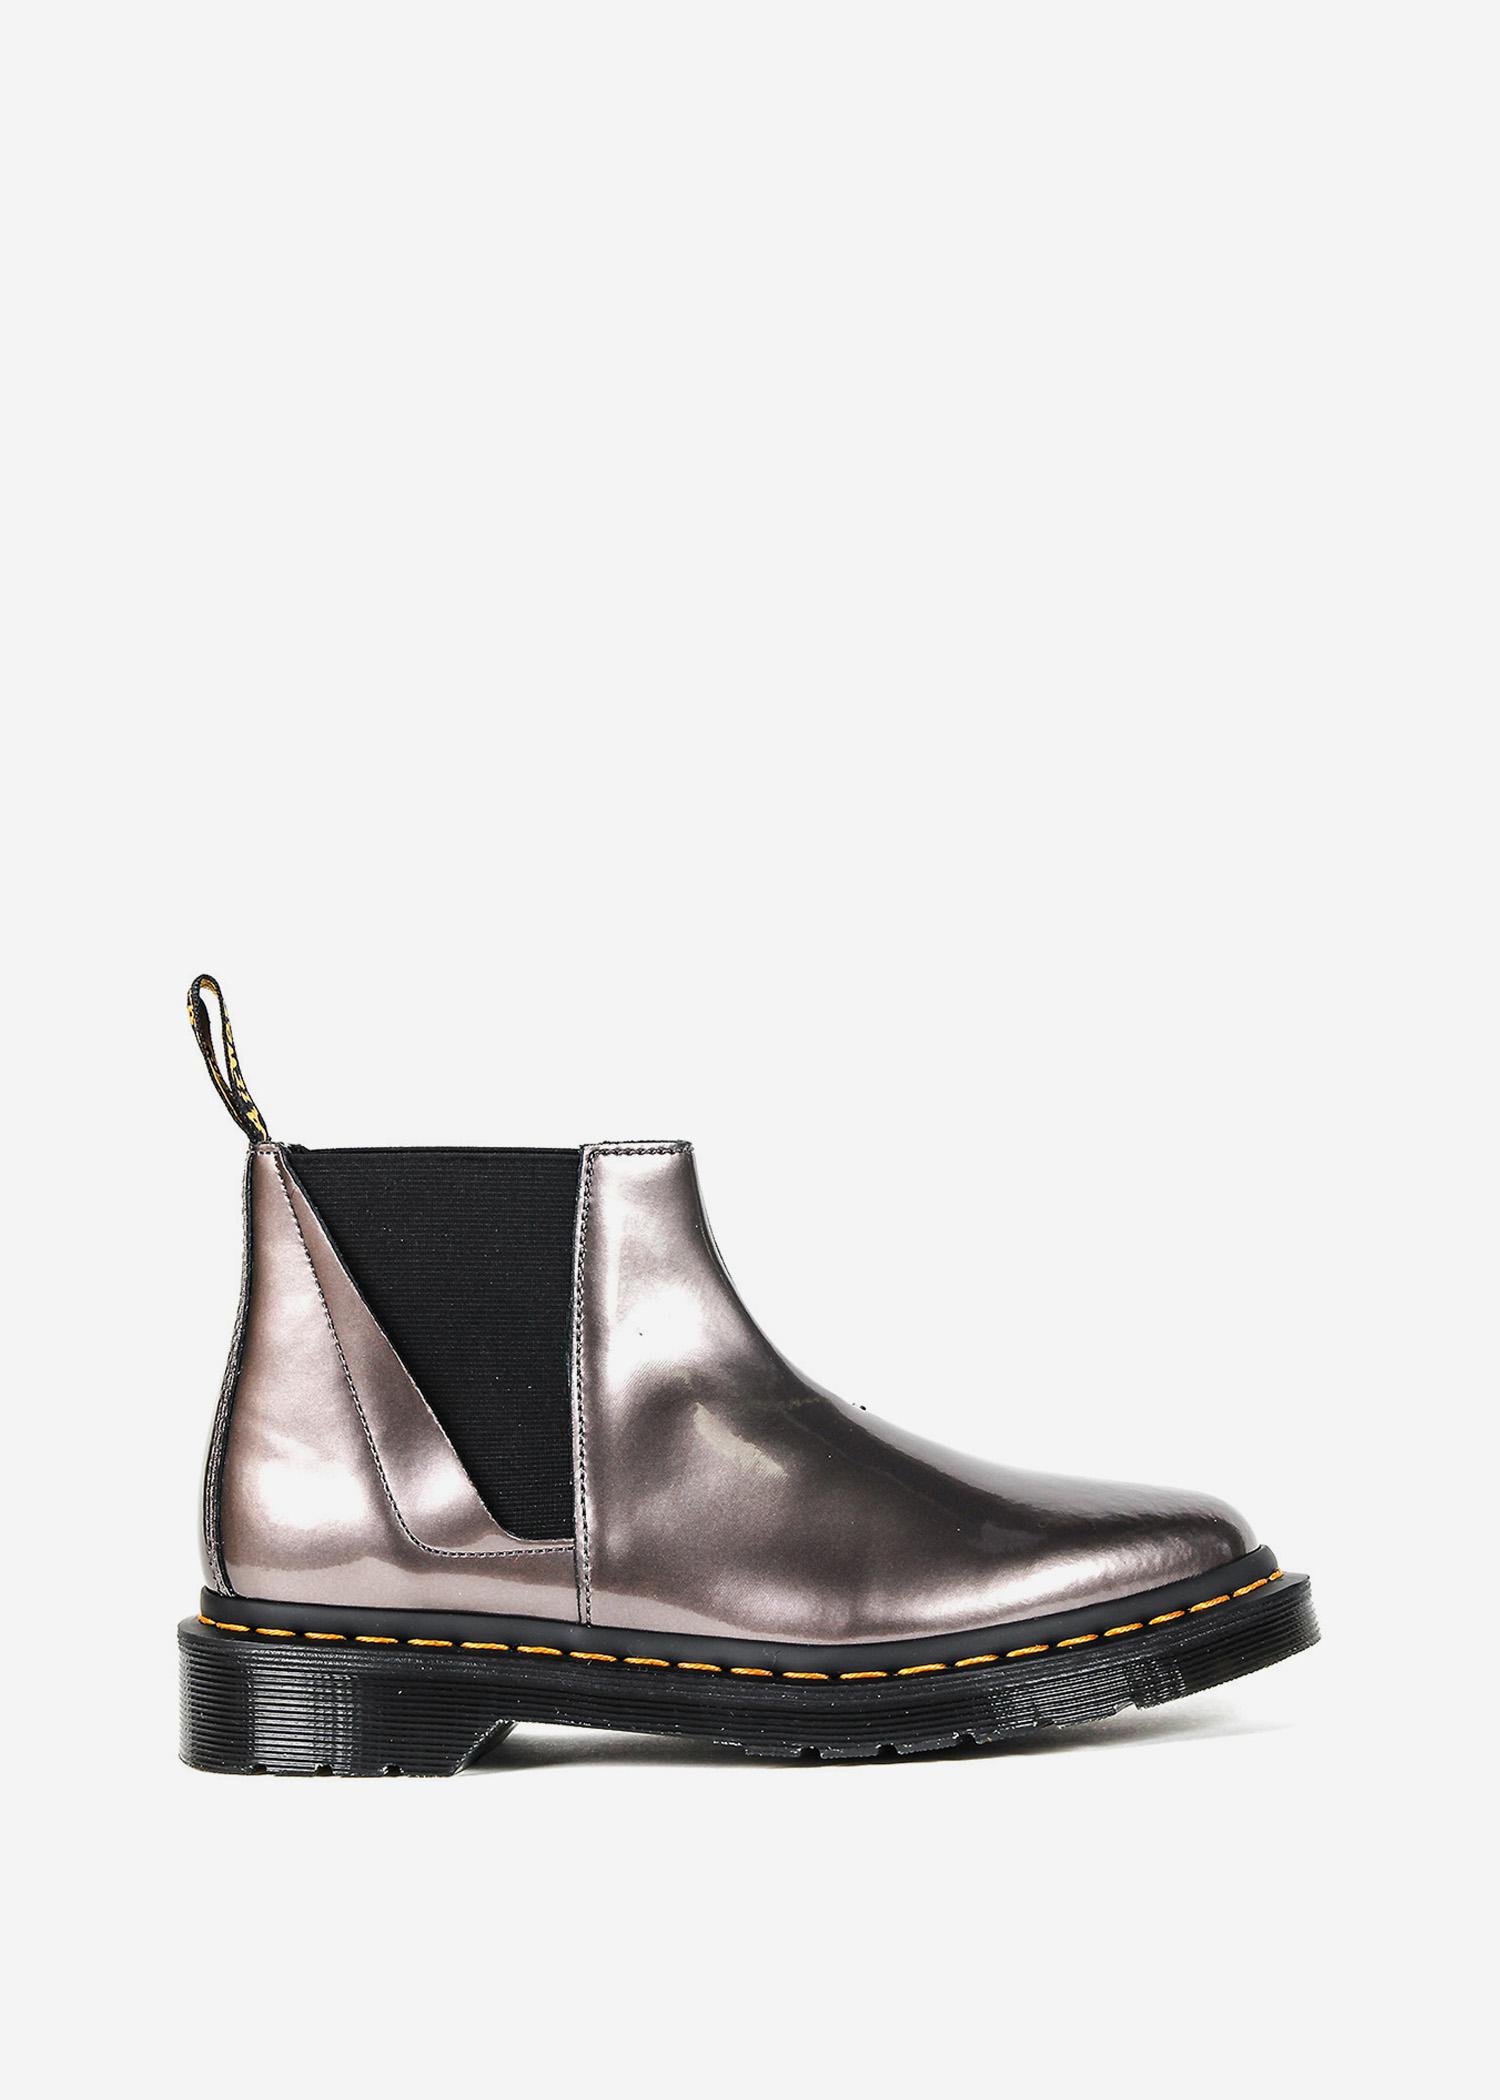 Dr. Martens Bianca Patent In Pewter | ModeSens